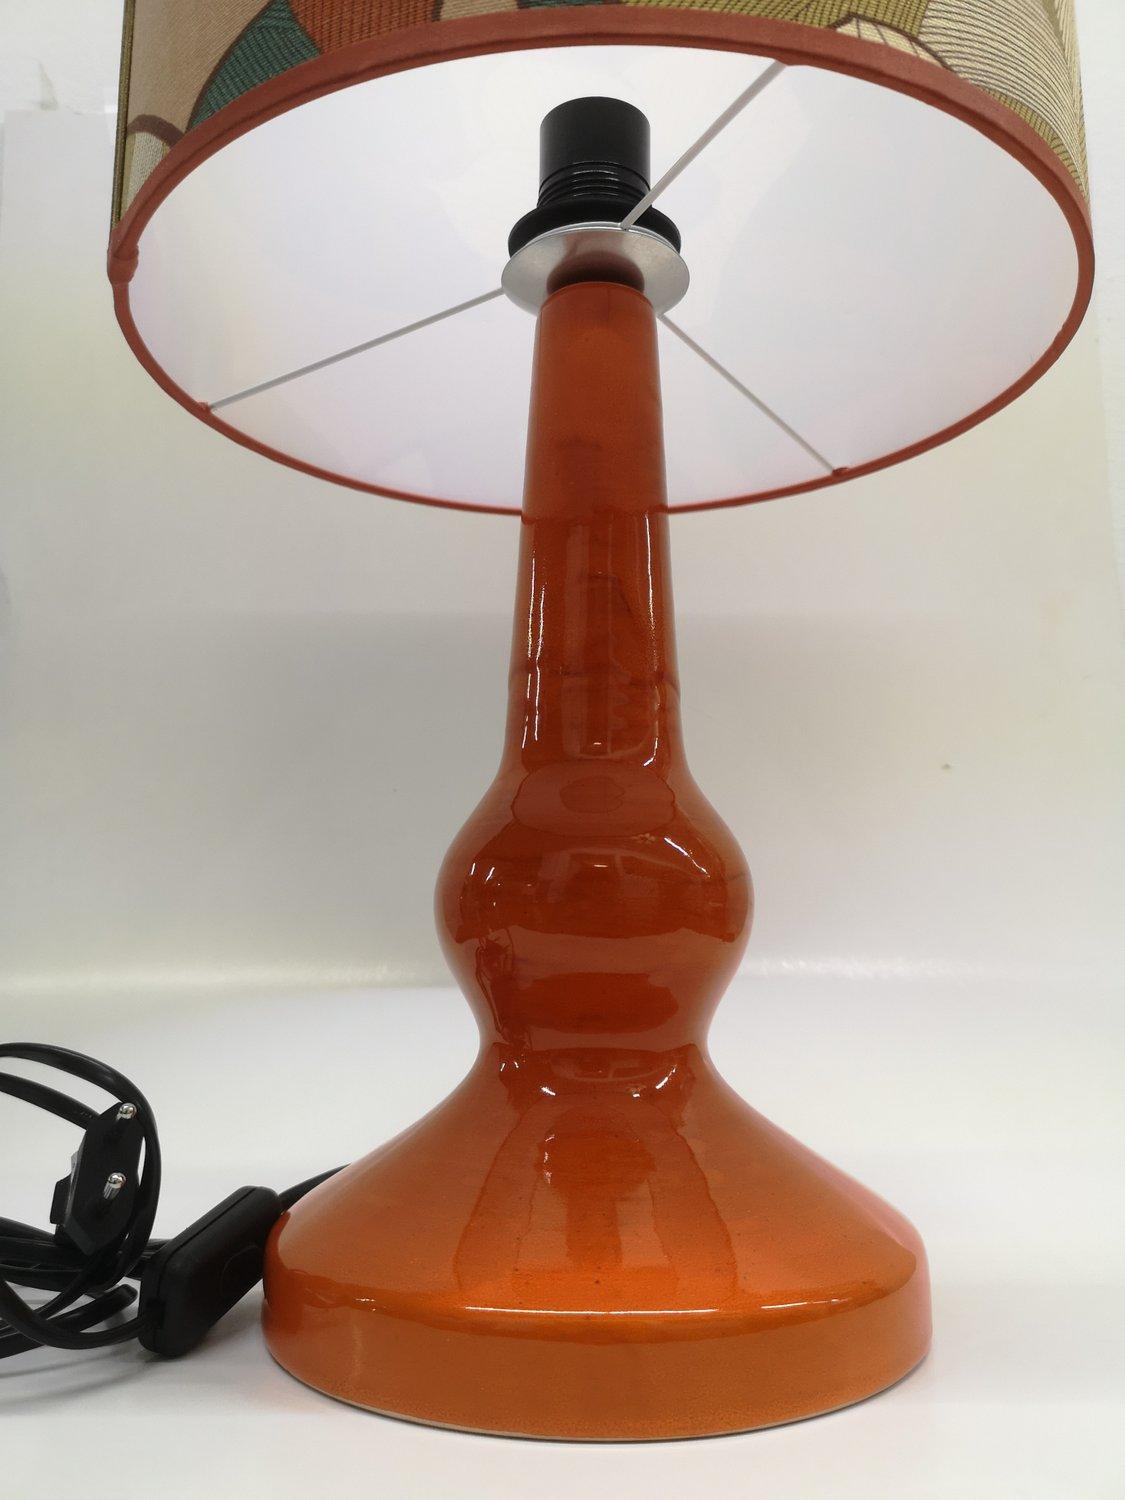 Hungarian Mid-century ceramic lamp from the 1960's with a newly made custom lamp shade. Completely rewired and restored to 